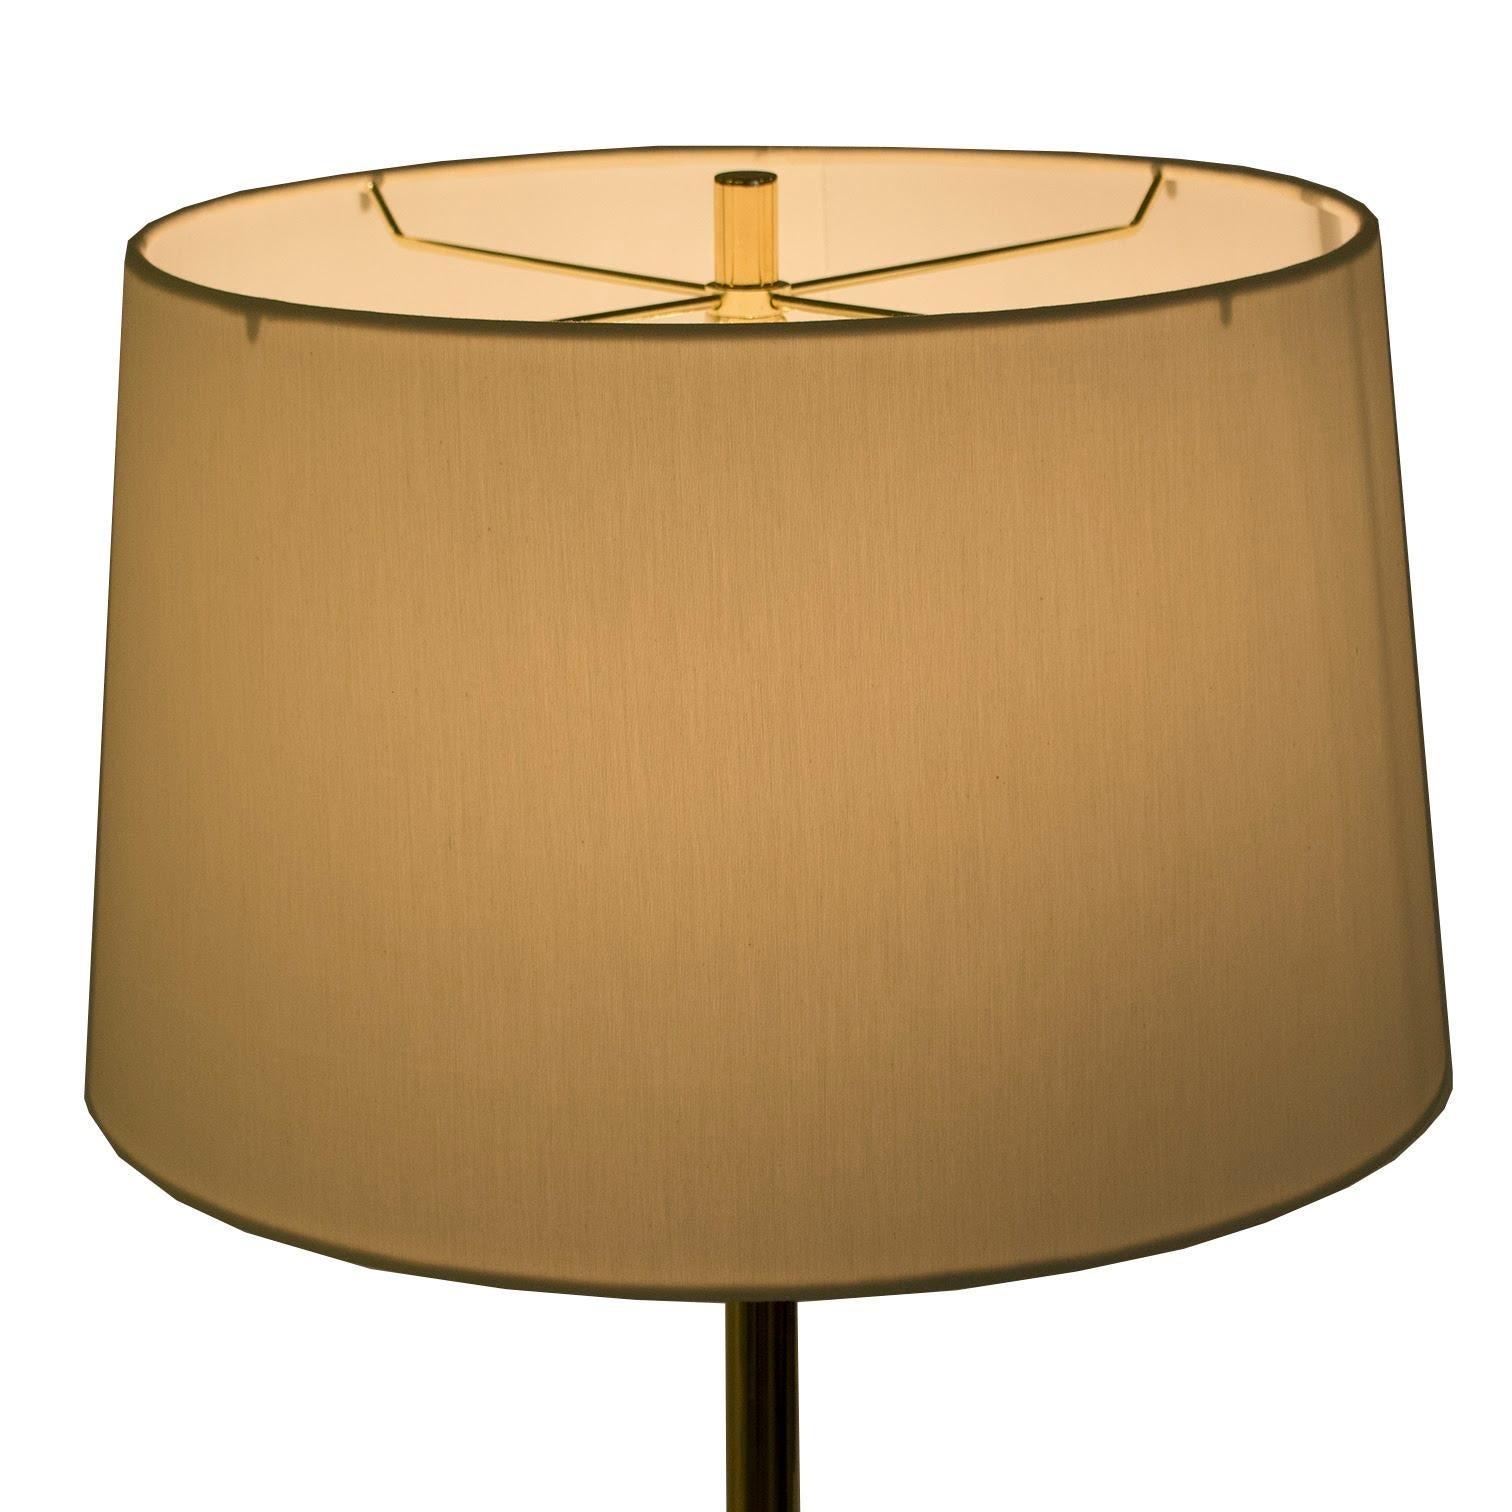 Circa 1980's tripod base floor lamp. Sleek design replated with brass base and stem. An elegant example of European Post Modern design. Sourced through from a New York collector.